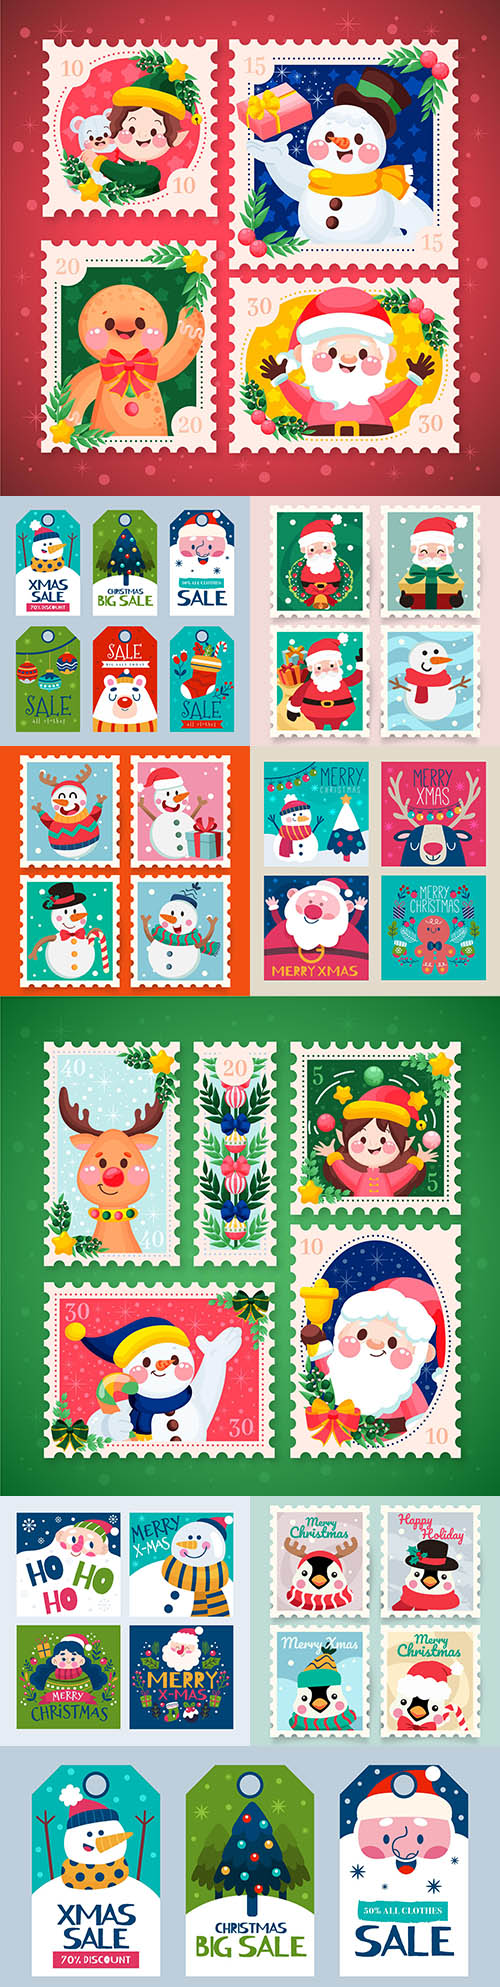 Christmas stamps and postcards flat design collection painted 2
